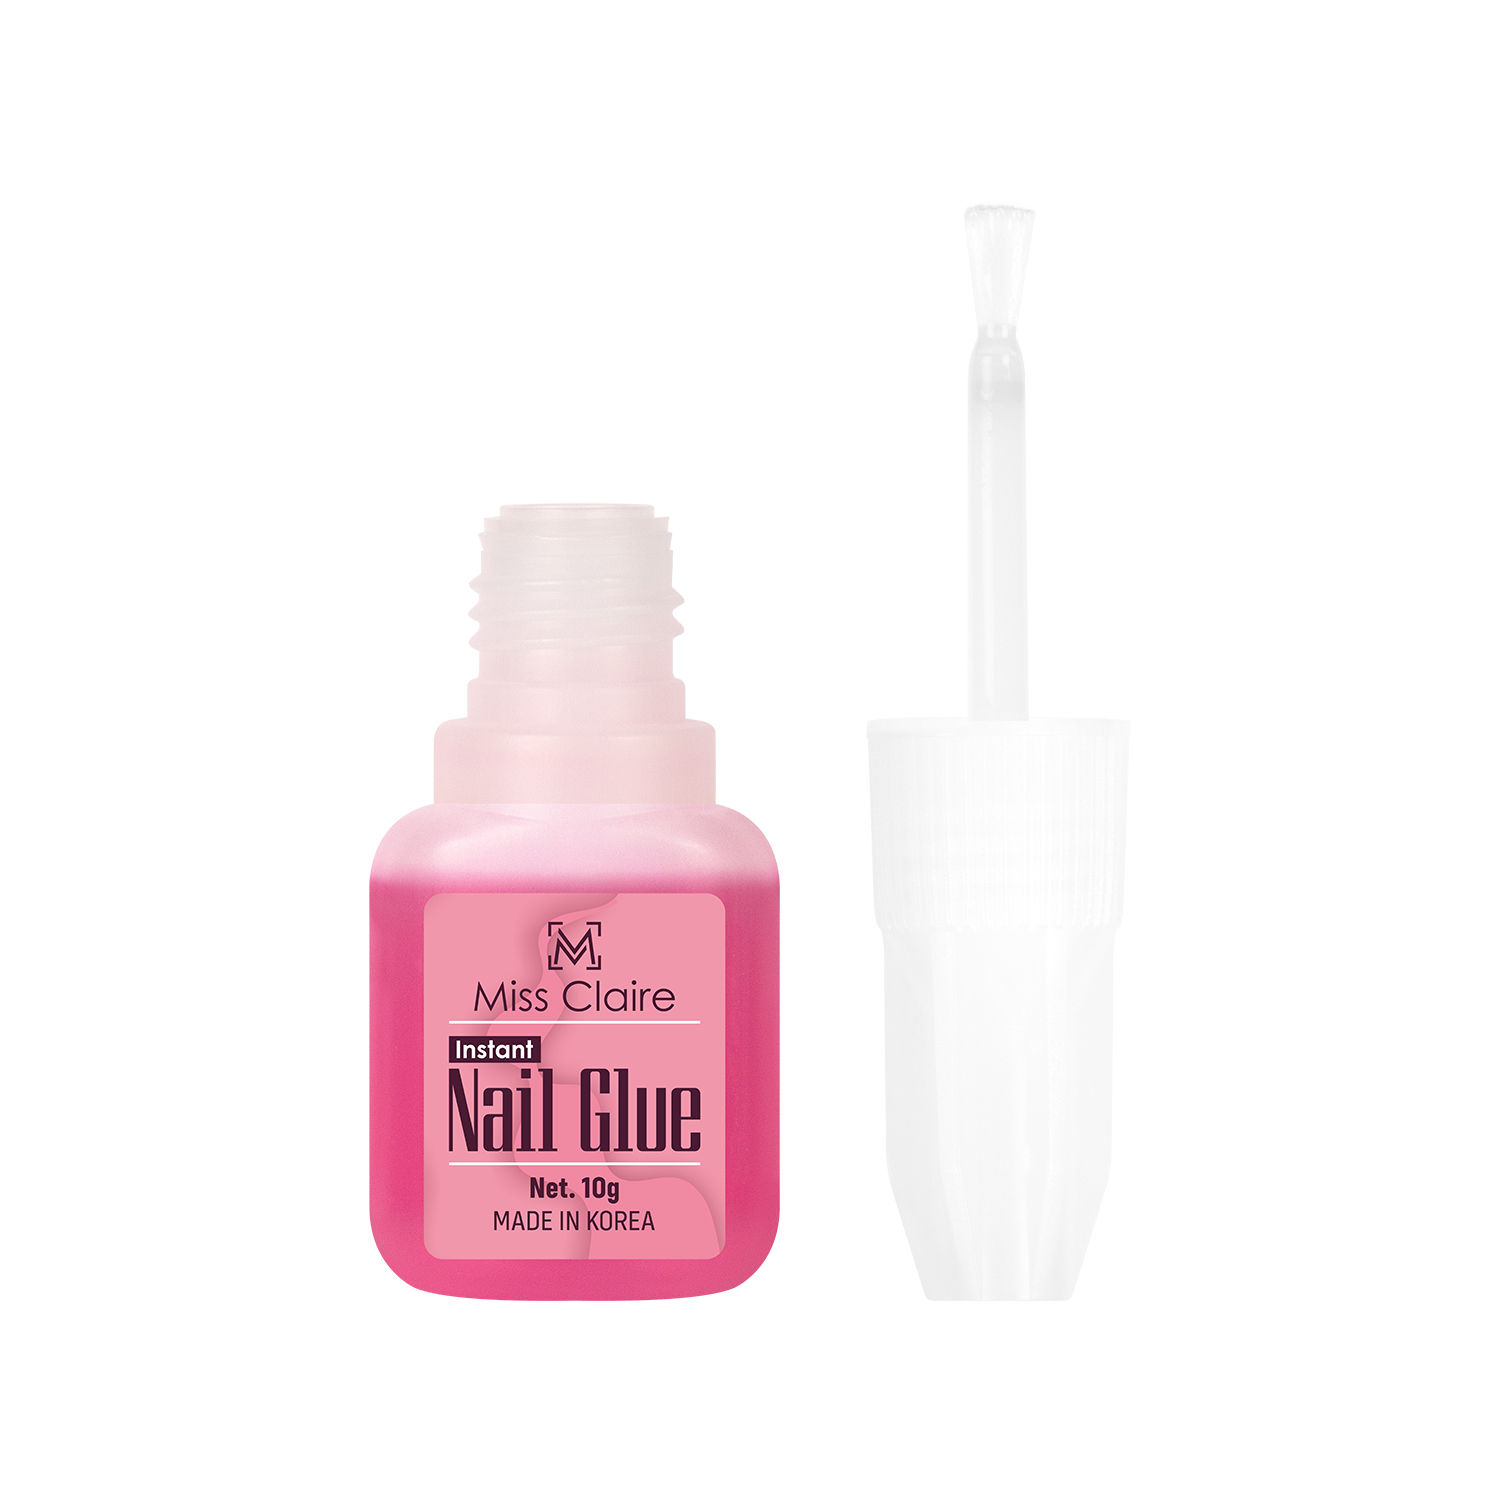 Miss Claire Nails Glue: Buy Miss Claire Nails Glue Online at Best Price ...